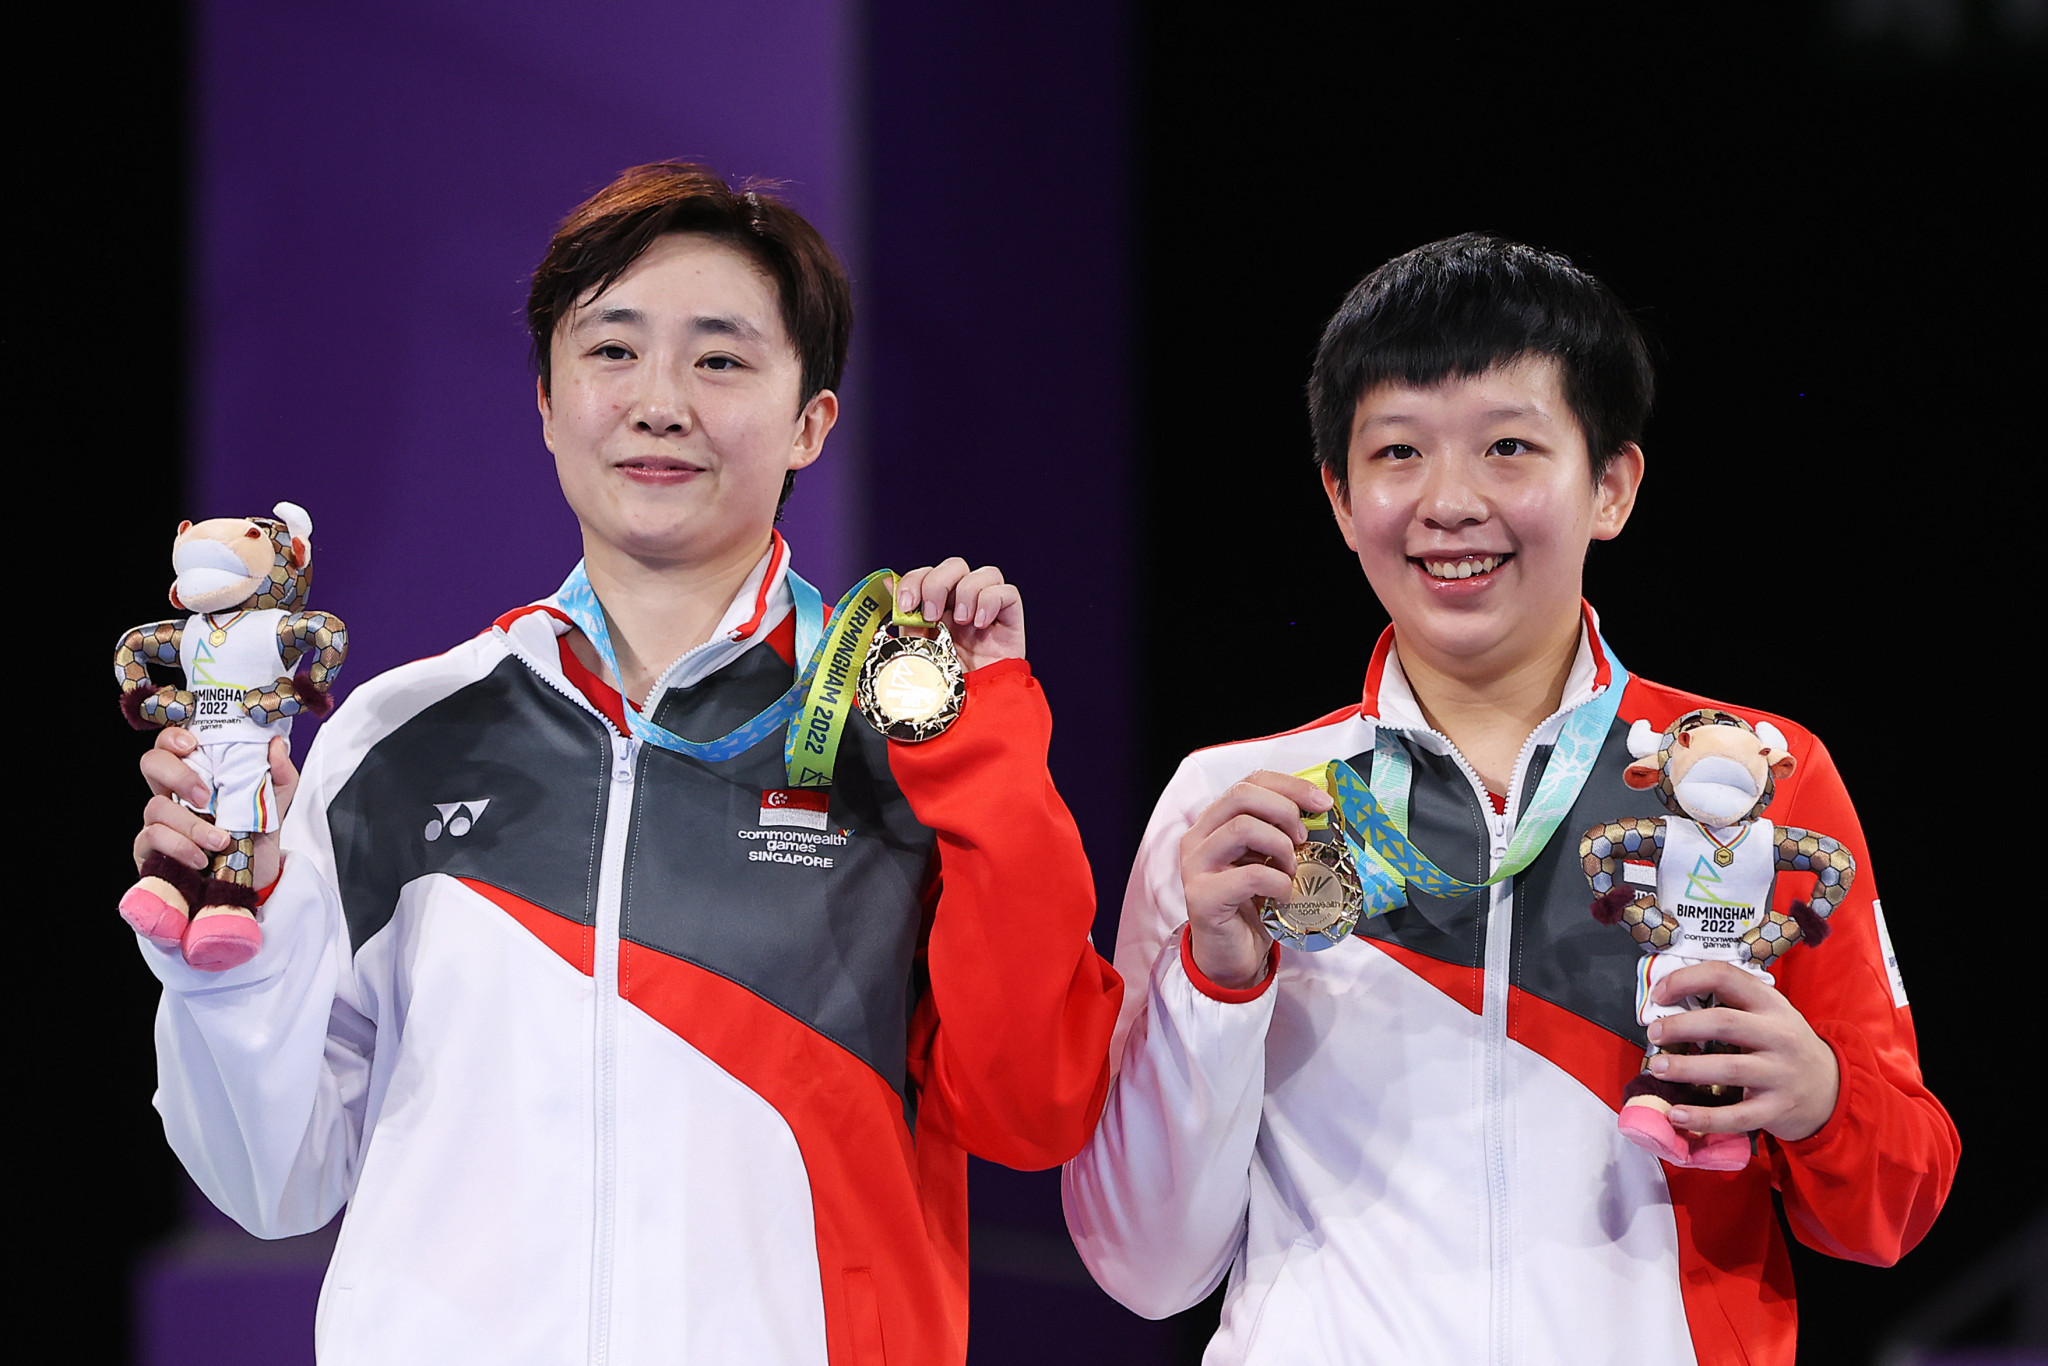 Feng Tianwei, left, became the most decorated table tennis player in Commonwealth Games history after winning women's doubles gold for Singapore with Zeng Jian, right ©Getty Images